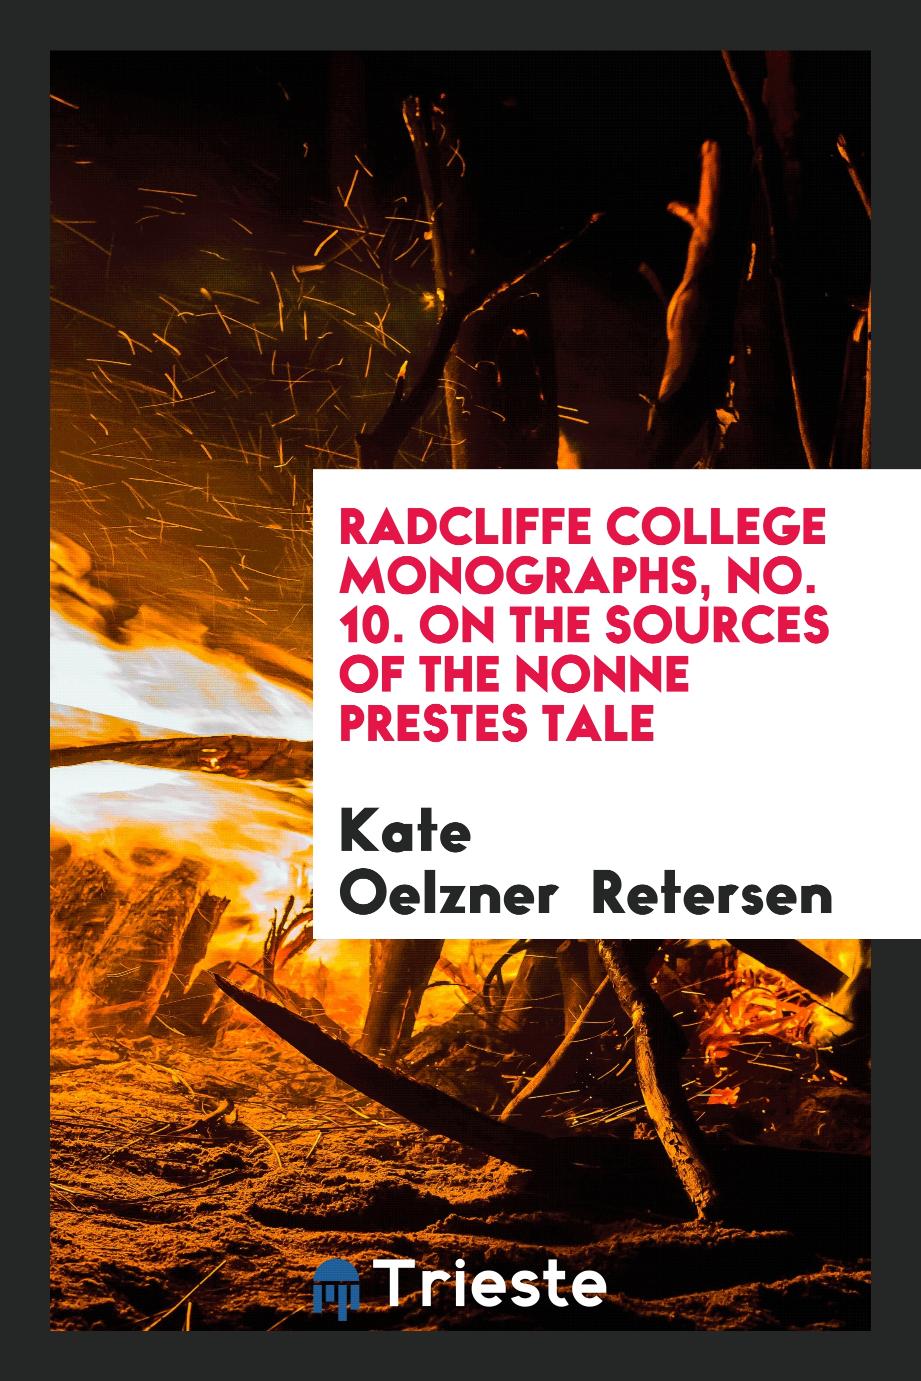 Radcliffe College Monographs, No. 10. On the Sources of the Nonne Prestes Tale